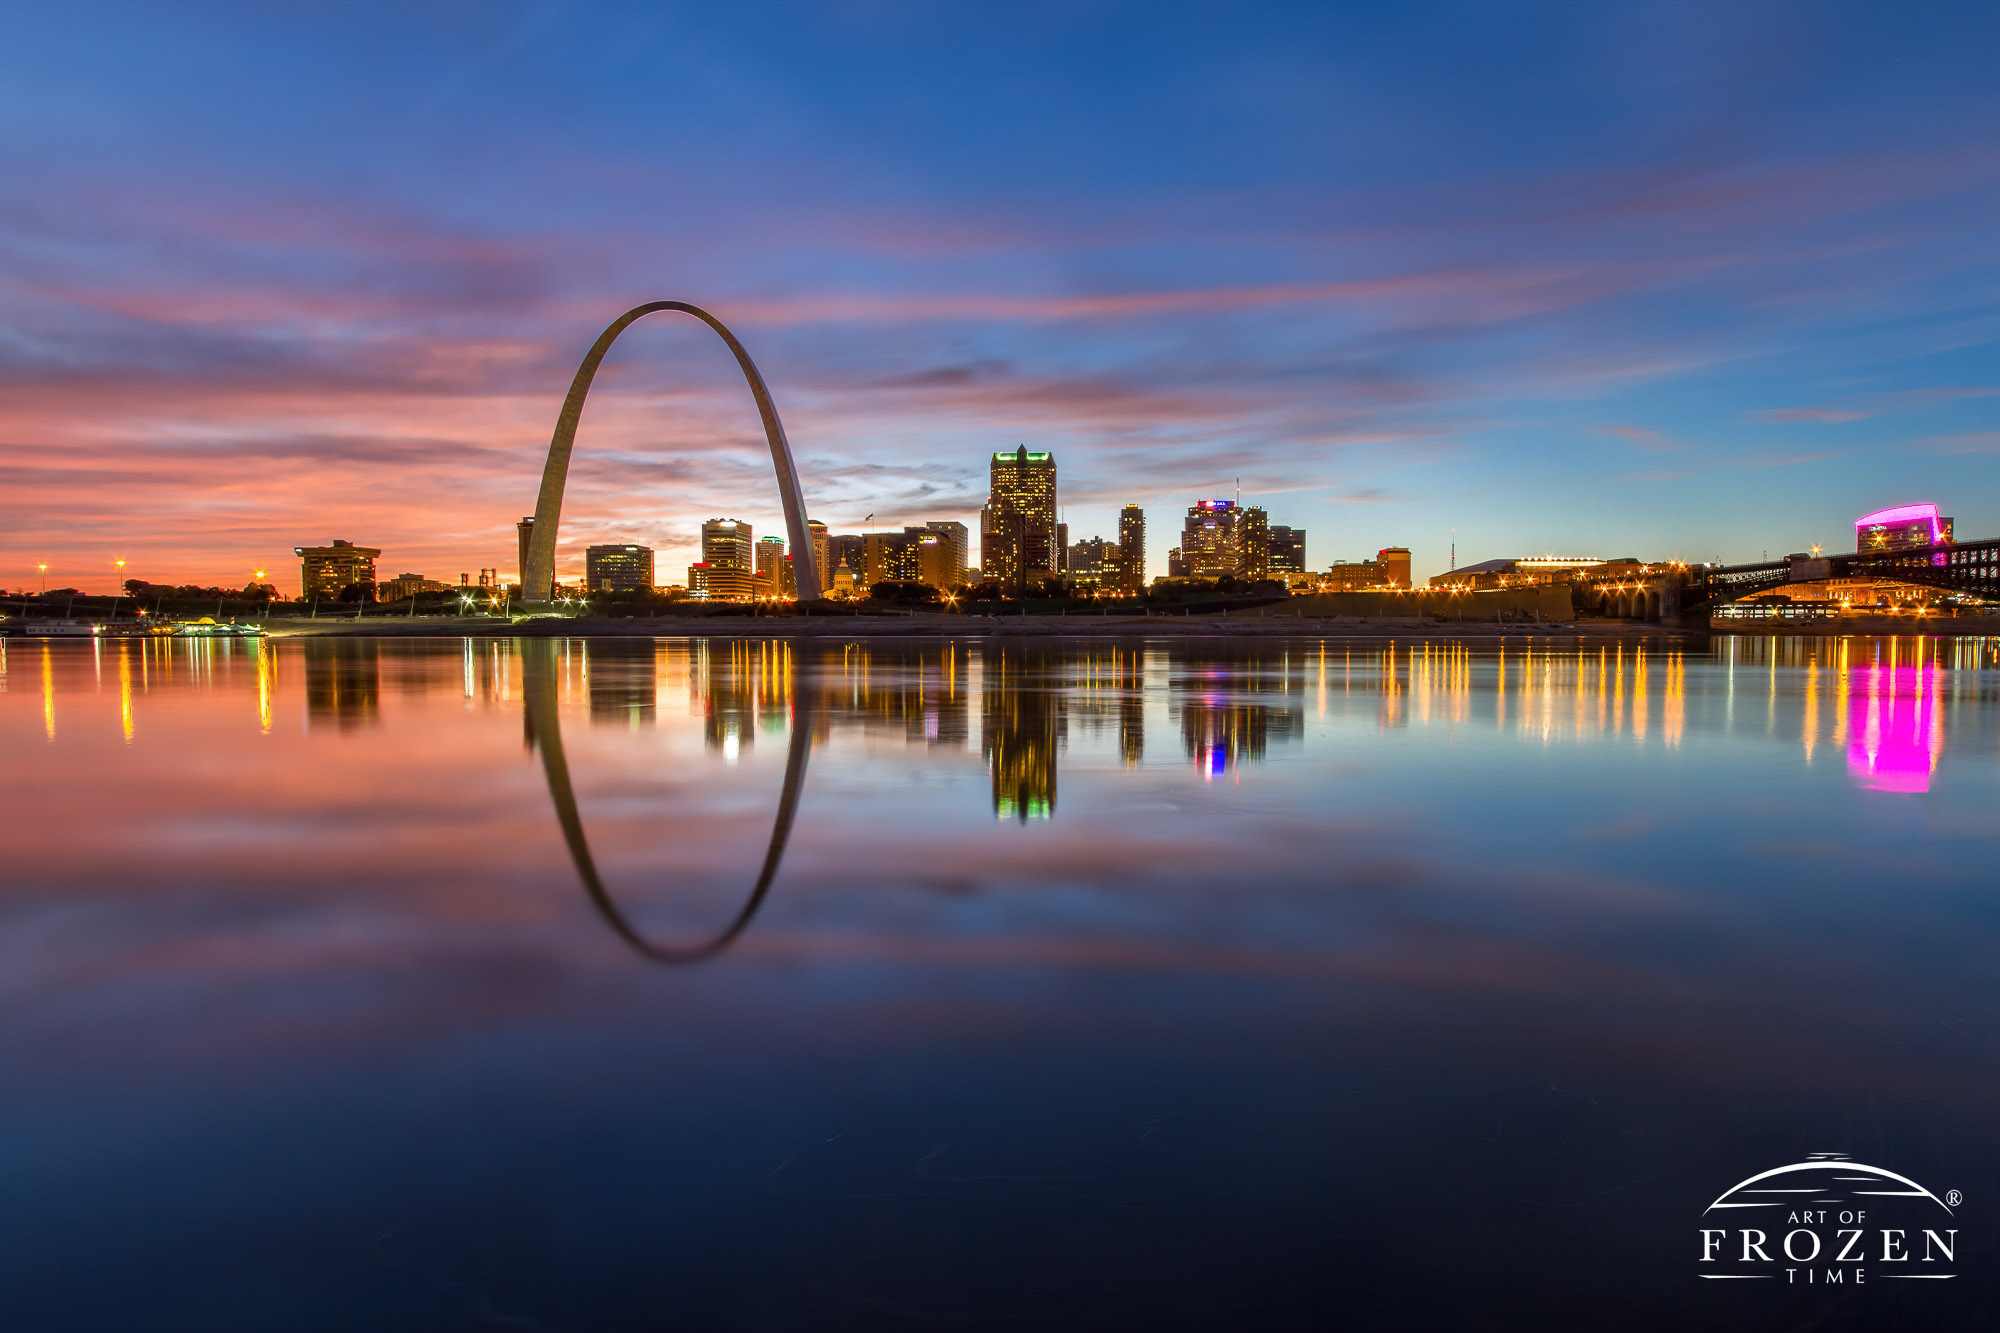 Twilight over St Louis Missouri where the smooth Mississippi River perfectly reflected the St Louis skyline and Gateway Arch